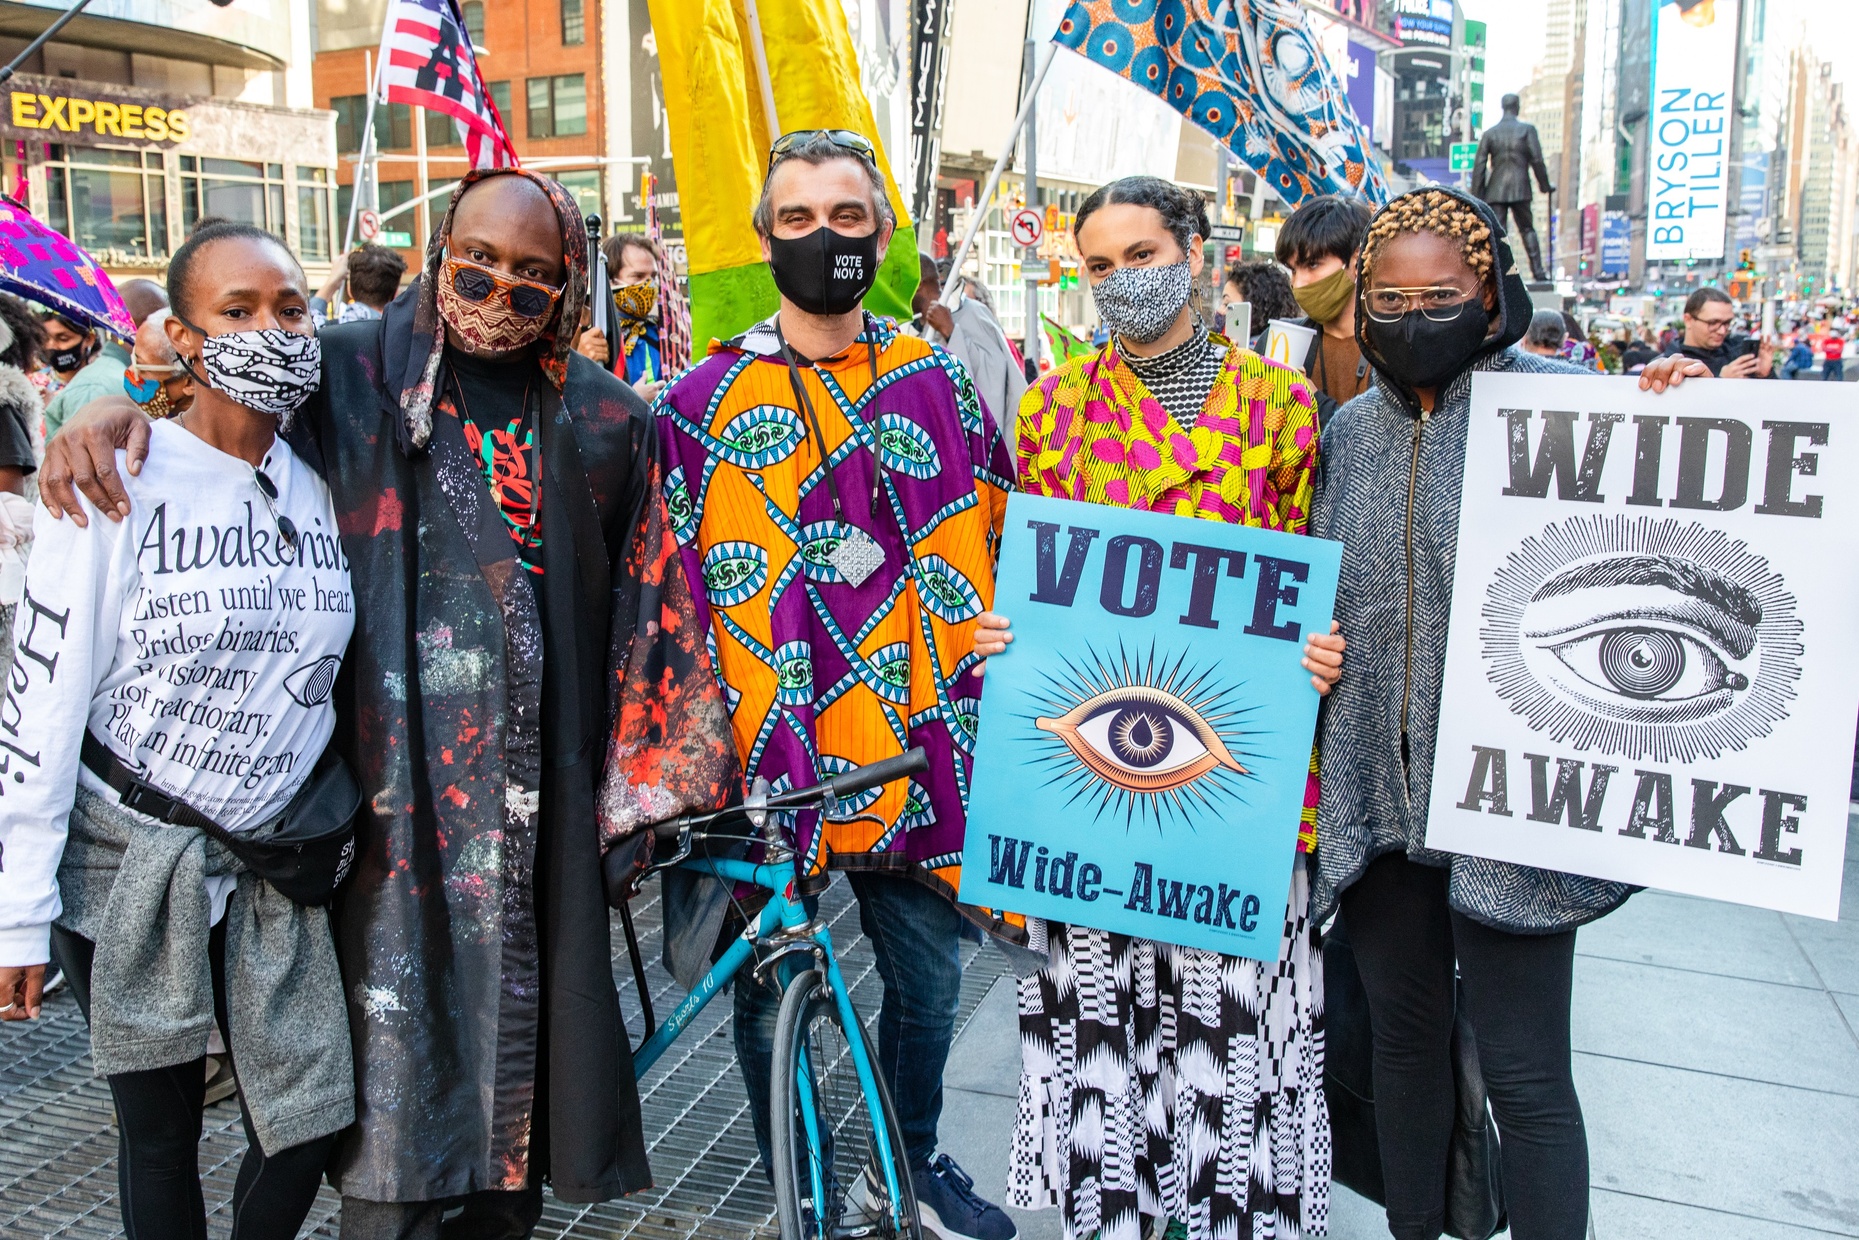 A photograph of five people standing close, wearing masks, a crowd of people behind them. Two people hold posters that say “VOTE Wide-Awake” and “WIDE AWAKE”; both feature the eye.